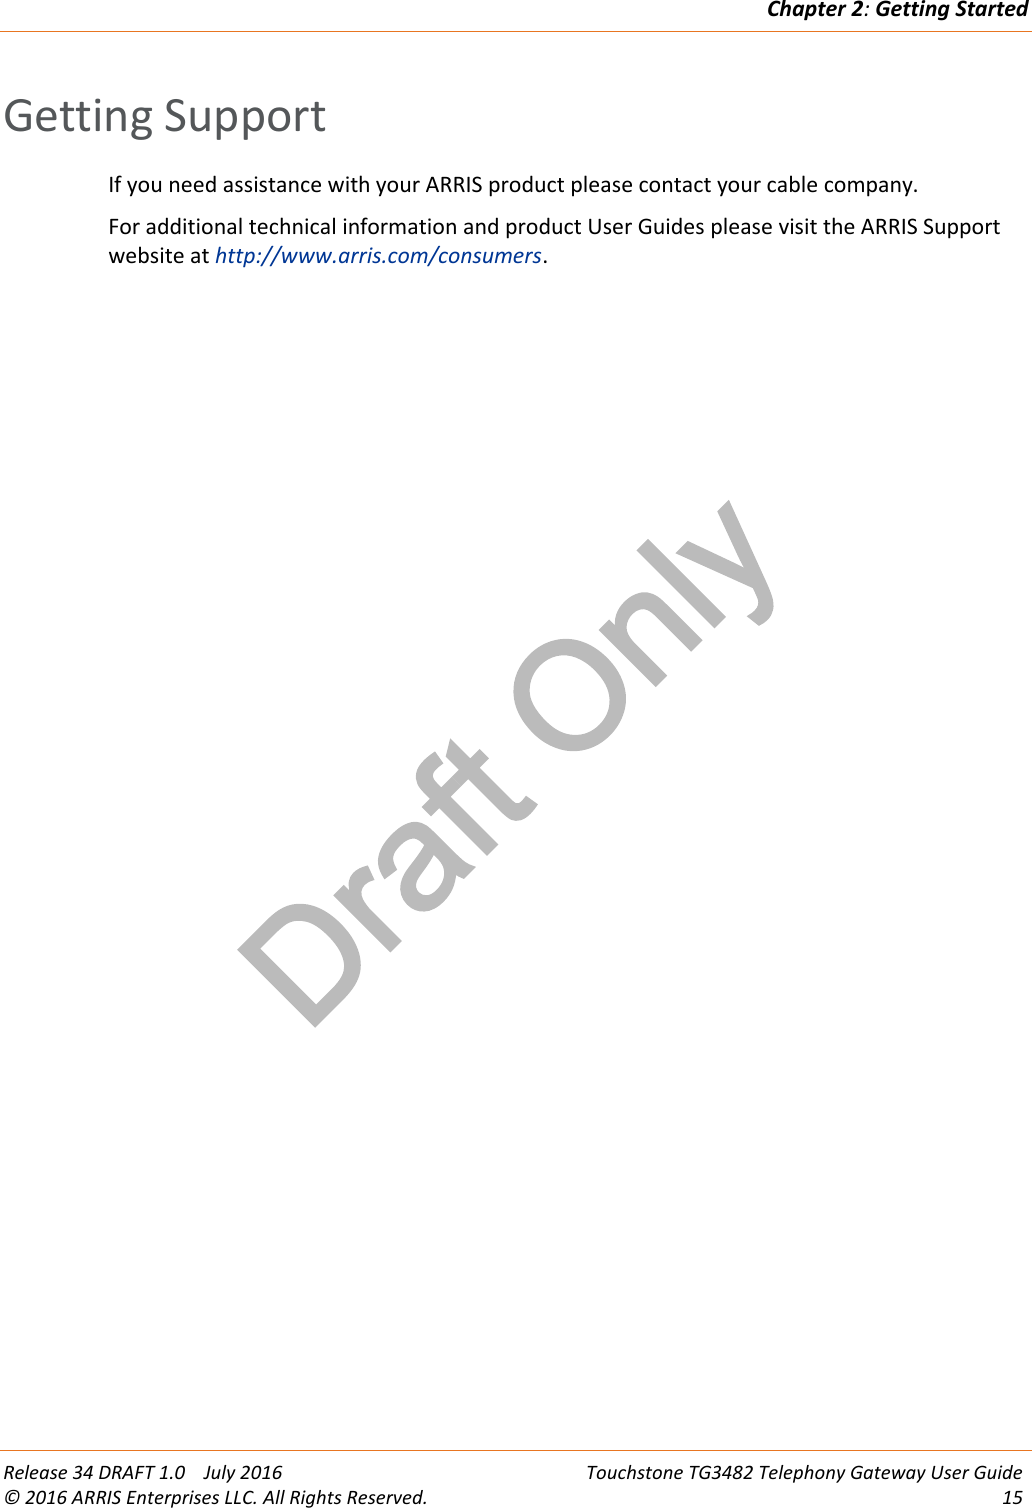 Draft OnlyChapter 2:Getting StartedRelease 34 DRAFT 1.0 July 2016 Touchstone TG3482 Telephony Gateway User Guide© 2016 ARRIS Enterprises LLC. All Rights Reserved. 15Getting SupportIf you need assistance with your ARRIS product please contact your cable company.For additional technical information and product User Guides please visit the ARRIS Supportwebsite at http://www.arris.com/consumers.